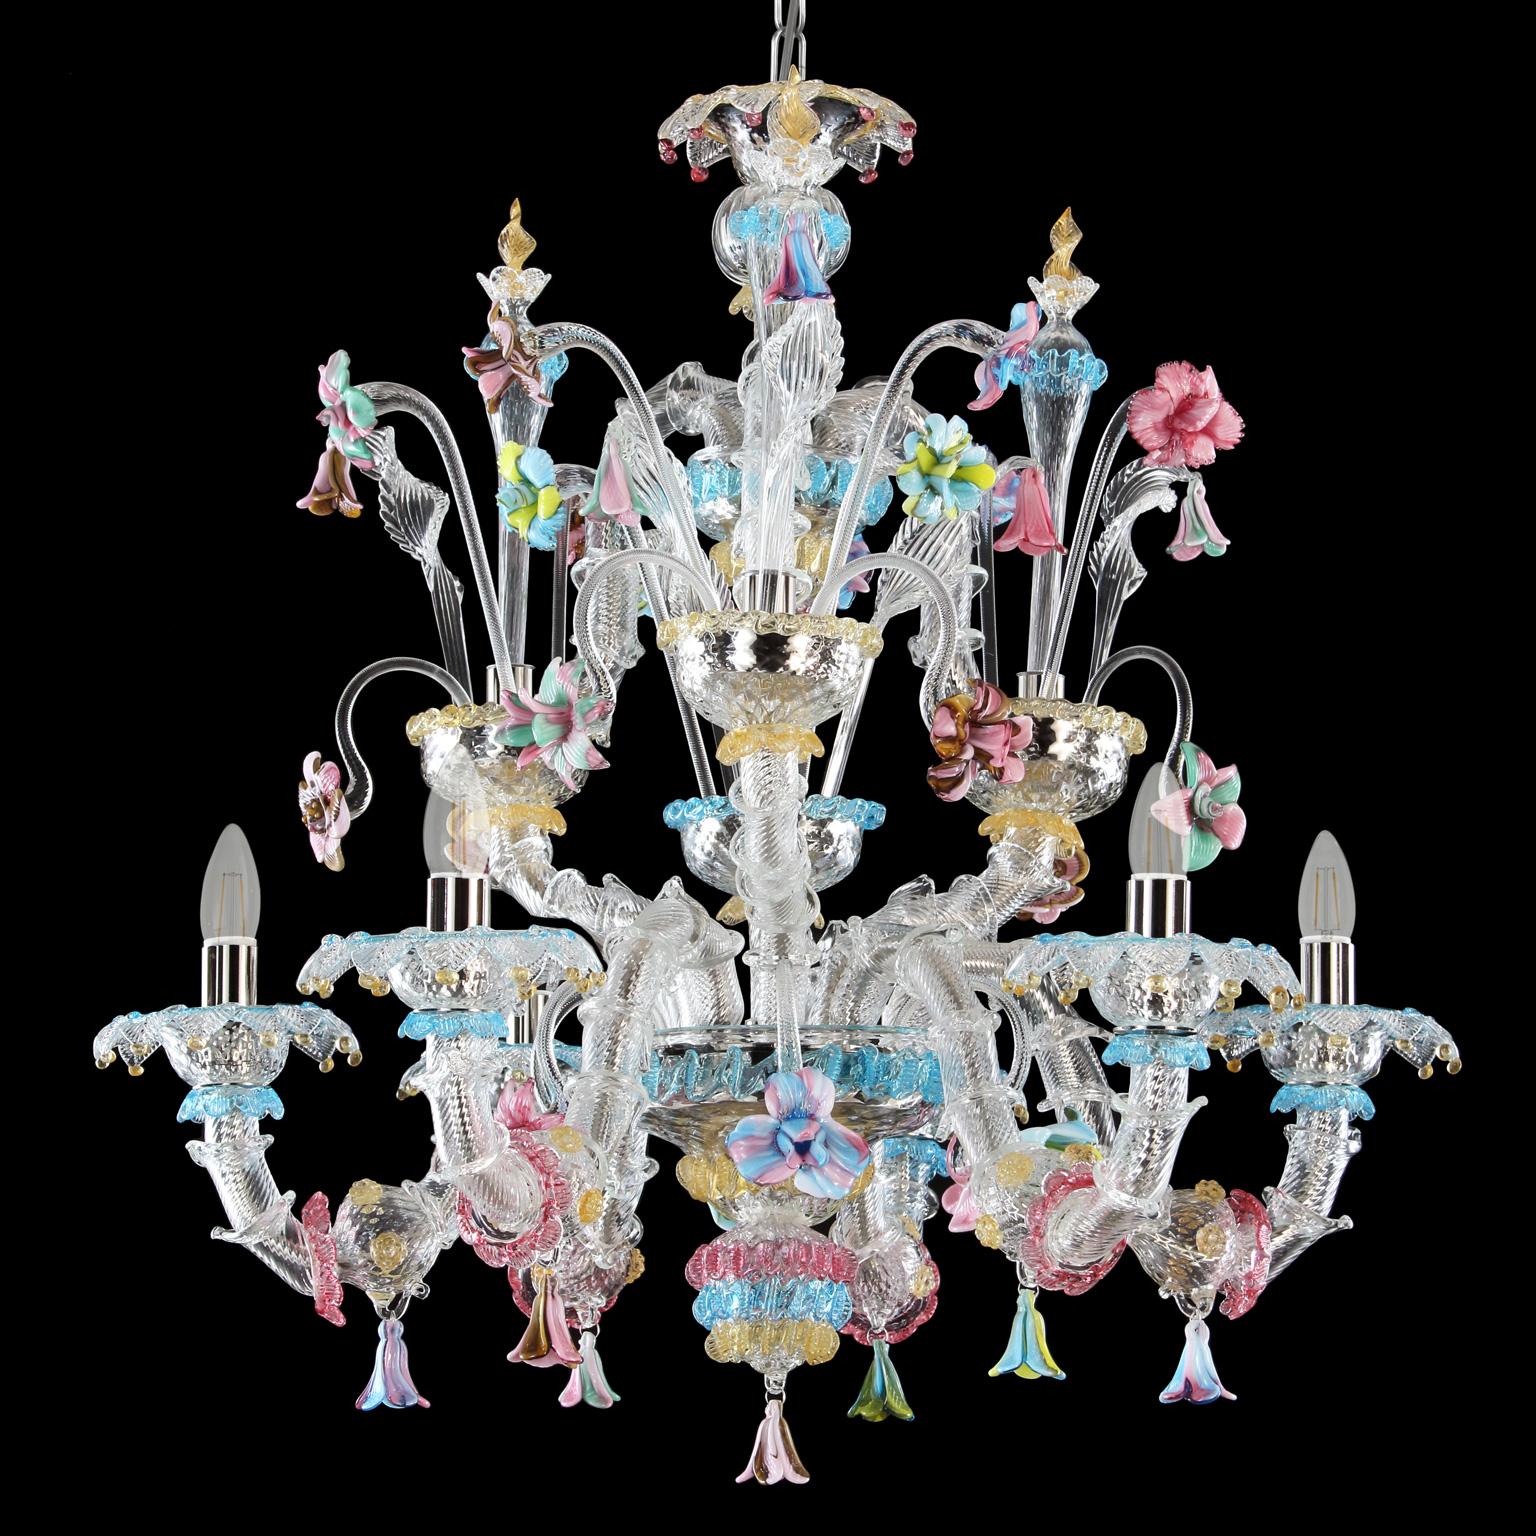 Rezzonico chandelier 6 arms, crystal Murano glass, rich of multi-color details by Multiforme.
This artistic glass chandelier is an elegant and delicate lighting work, colored with pastel tones. The structure is a combination of well-proportioned